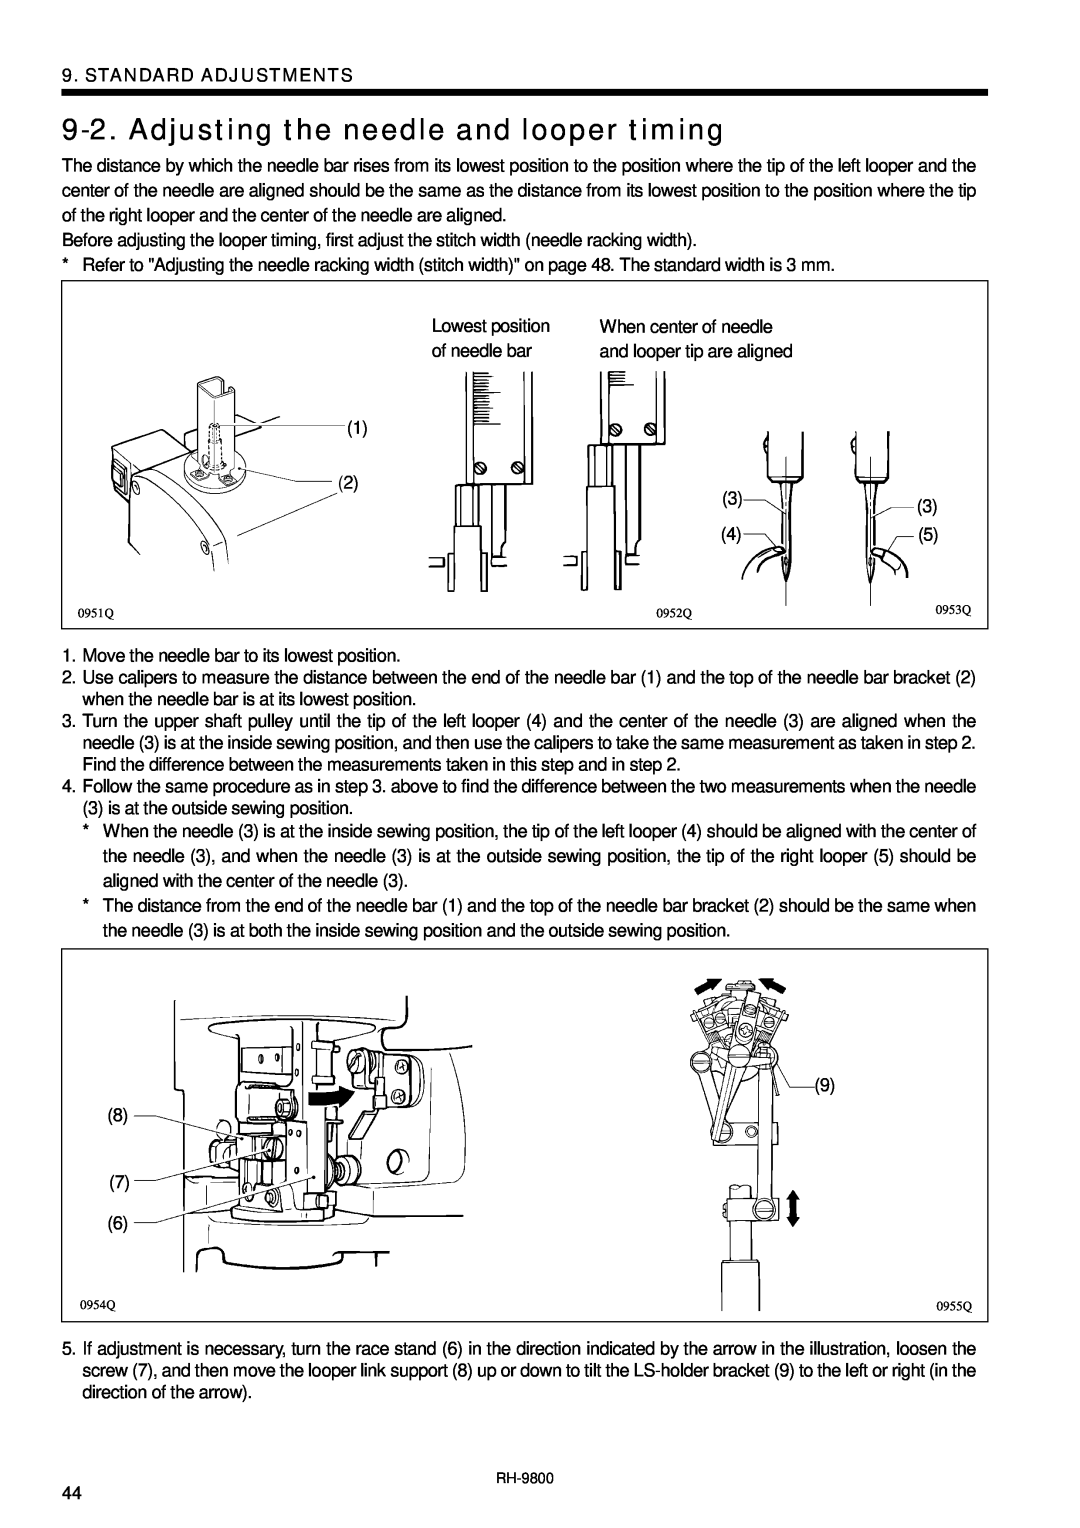 Brother DH4-B980 instruction manual Adjusting the needle and looper timing, Standard Adjustments 